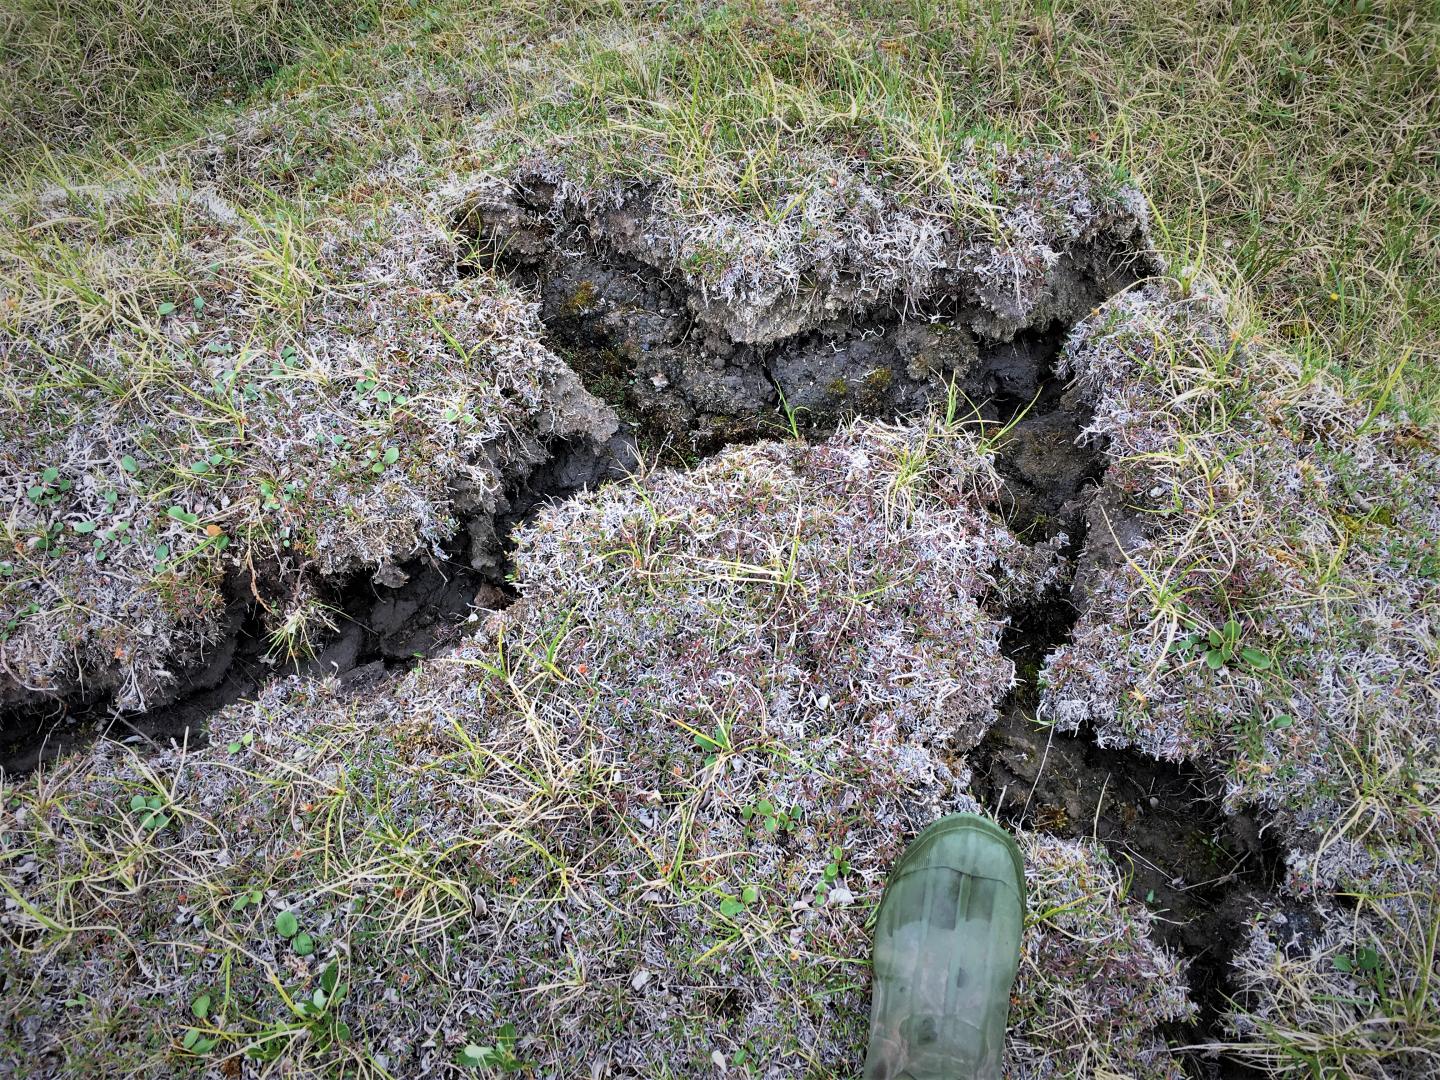 Image of cracked ground with a green rubber boot.